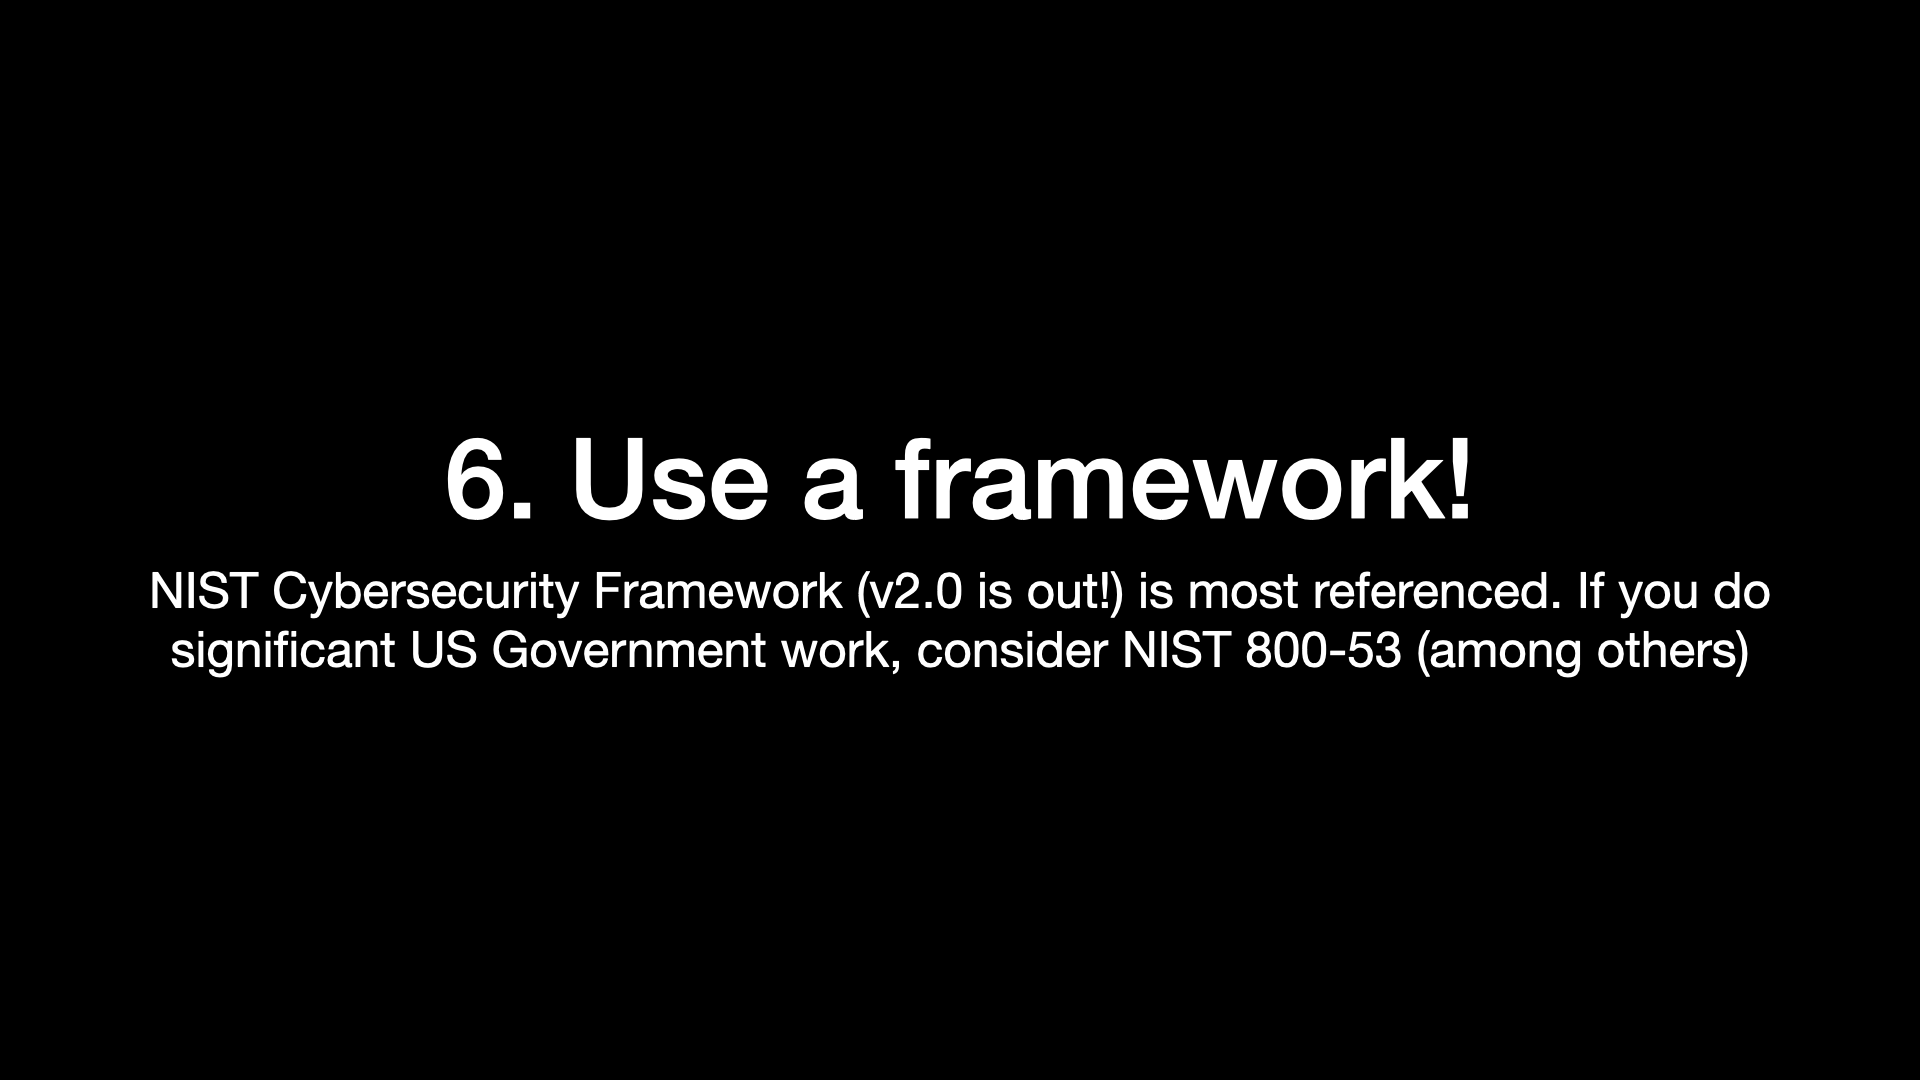 6. Use a framework! NIST Cybersecurity Framework (v2.0 is out!) is most referenced. If you do significant US Government work, consider NIST 800-53 (among others) 